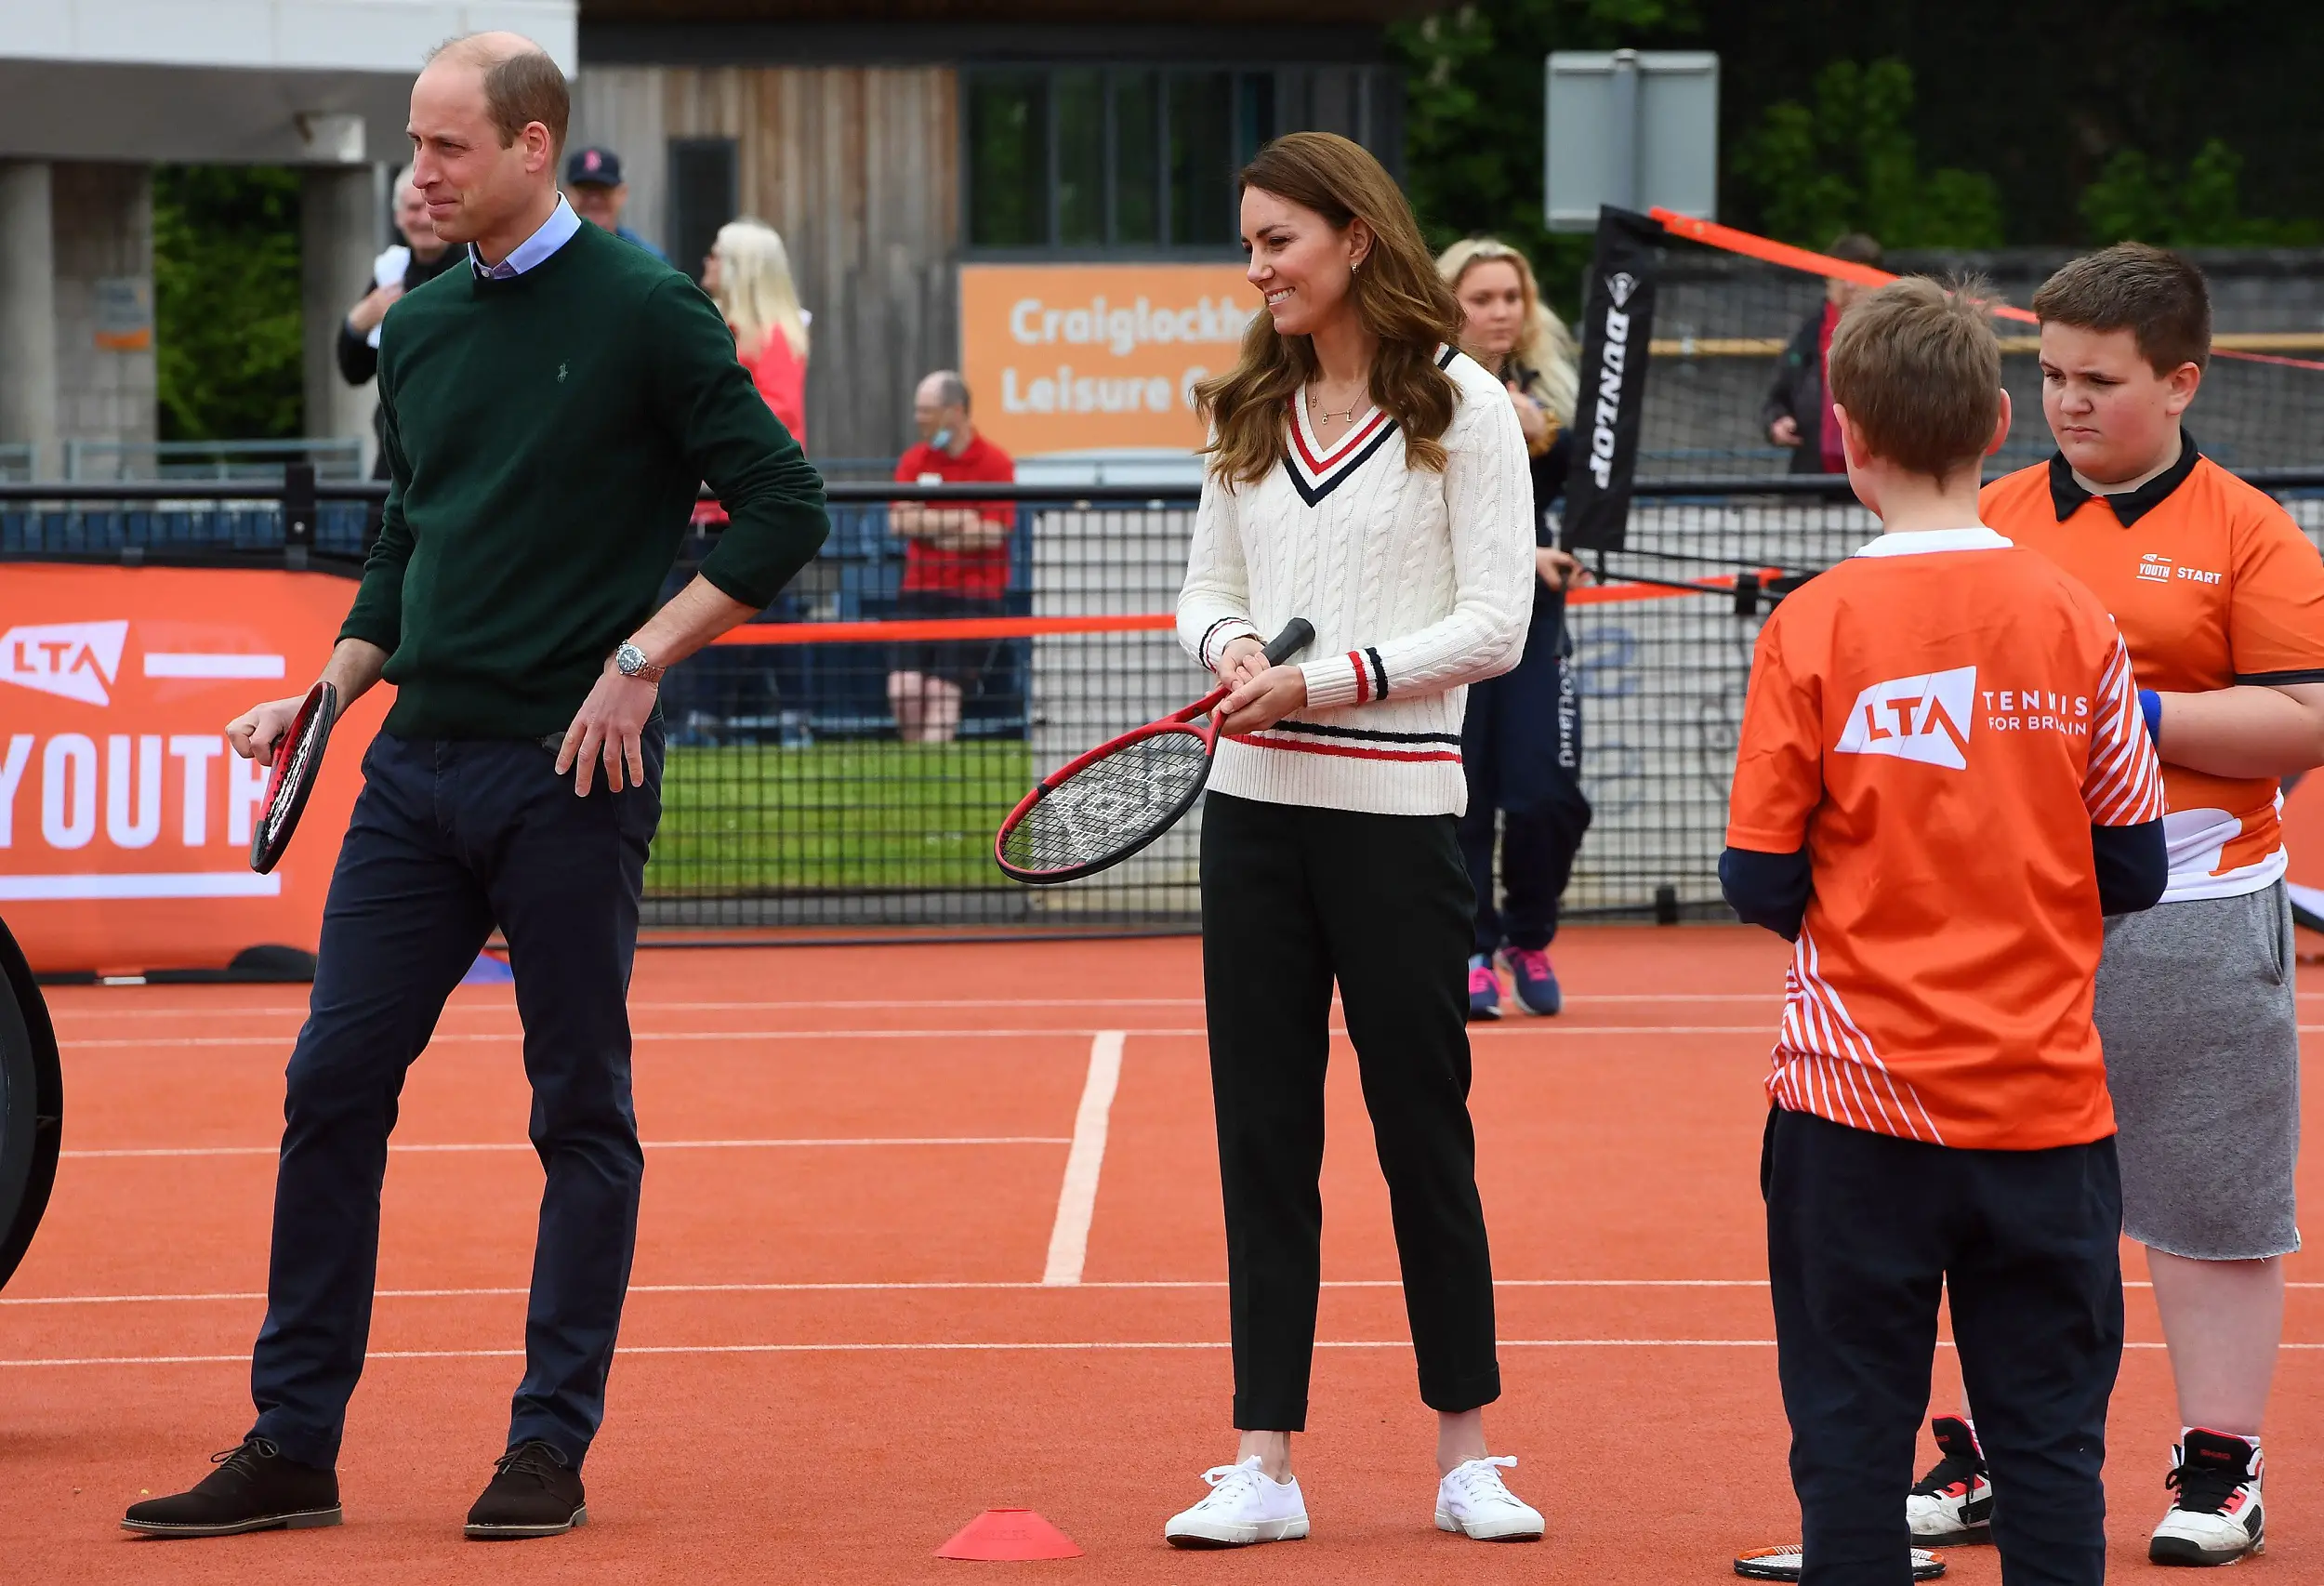 The Duke and Duchess of Cambridge joined children for a set of exercises from the Lawn Tennis Association Youth programme